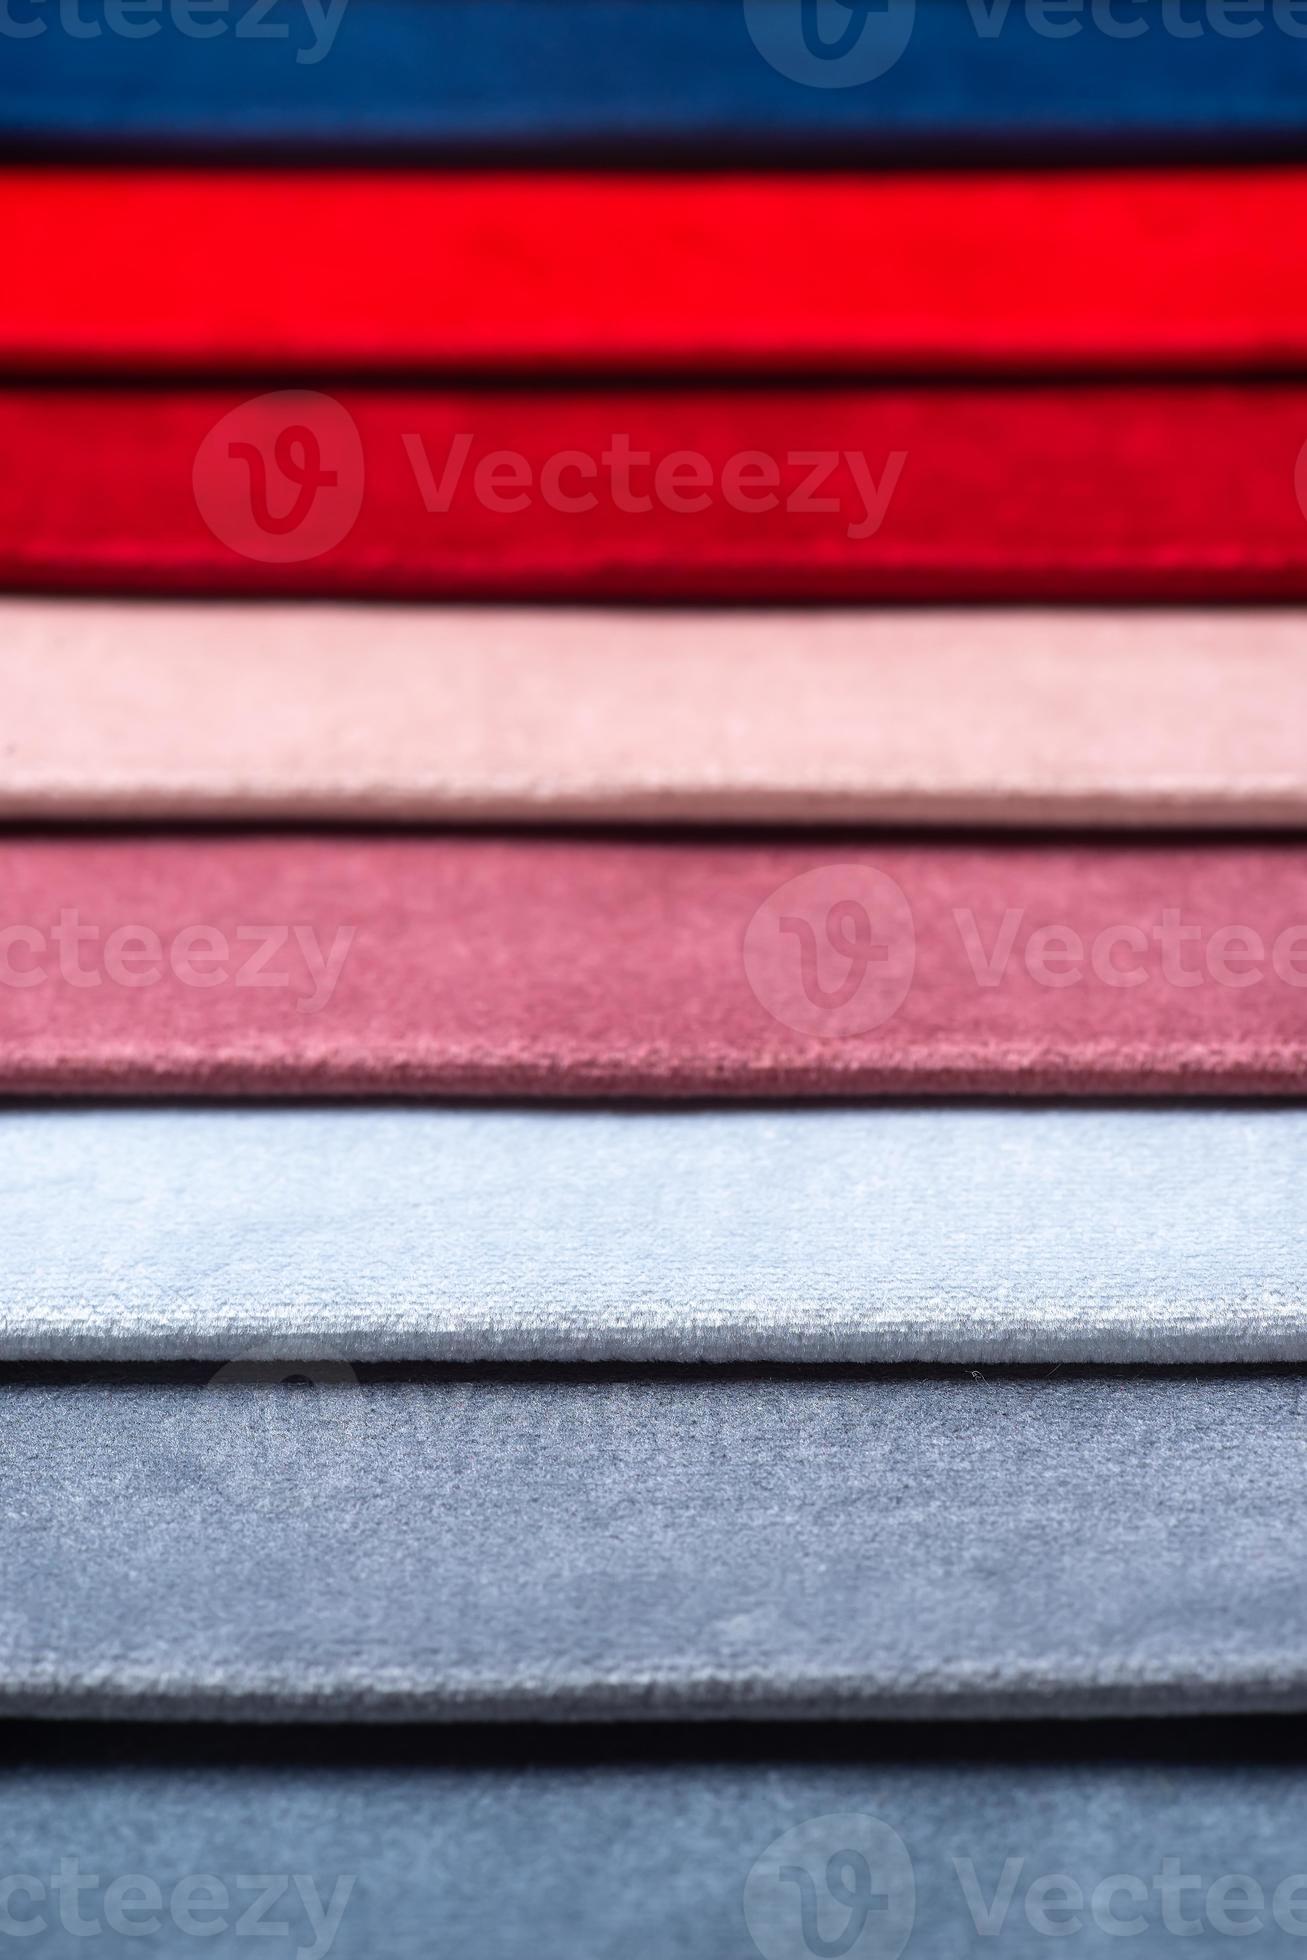 Multi Colored Set Of Upholstery Fabric Samples For Selection, Collection Of  Textile Swatches Stock Photo by Kateryna_Maksymenko